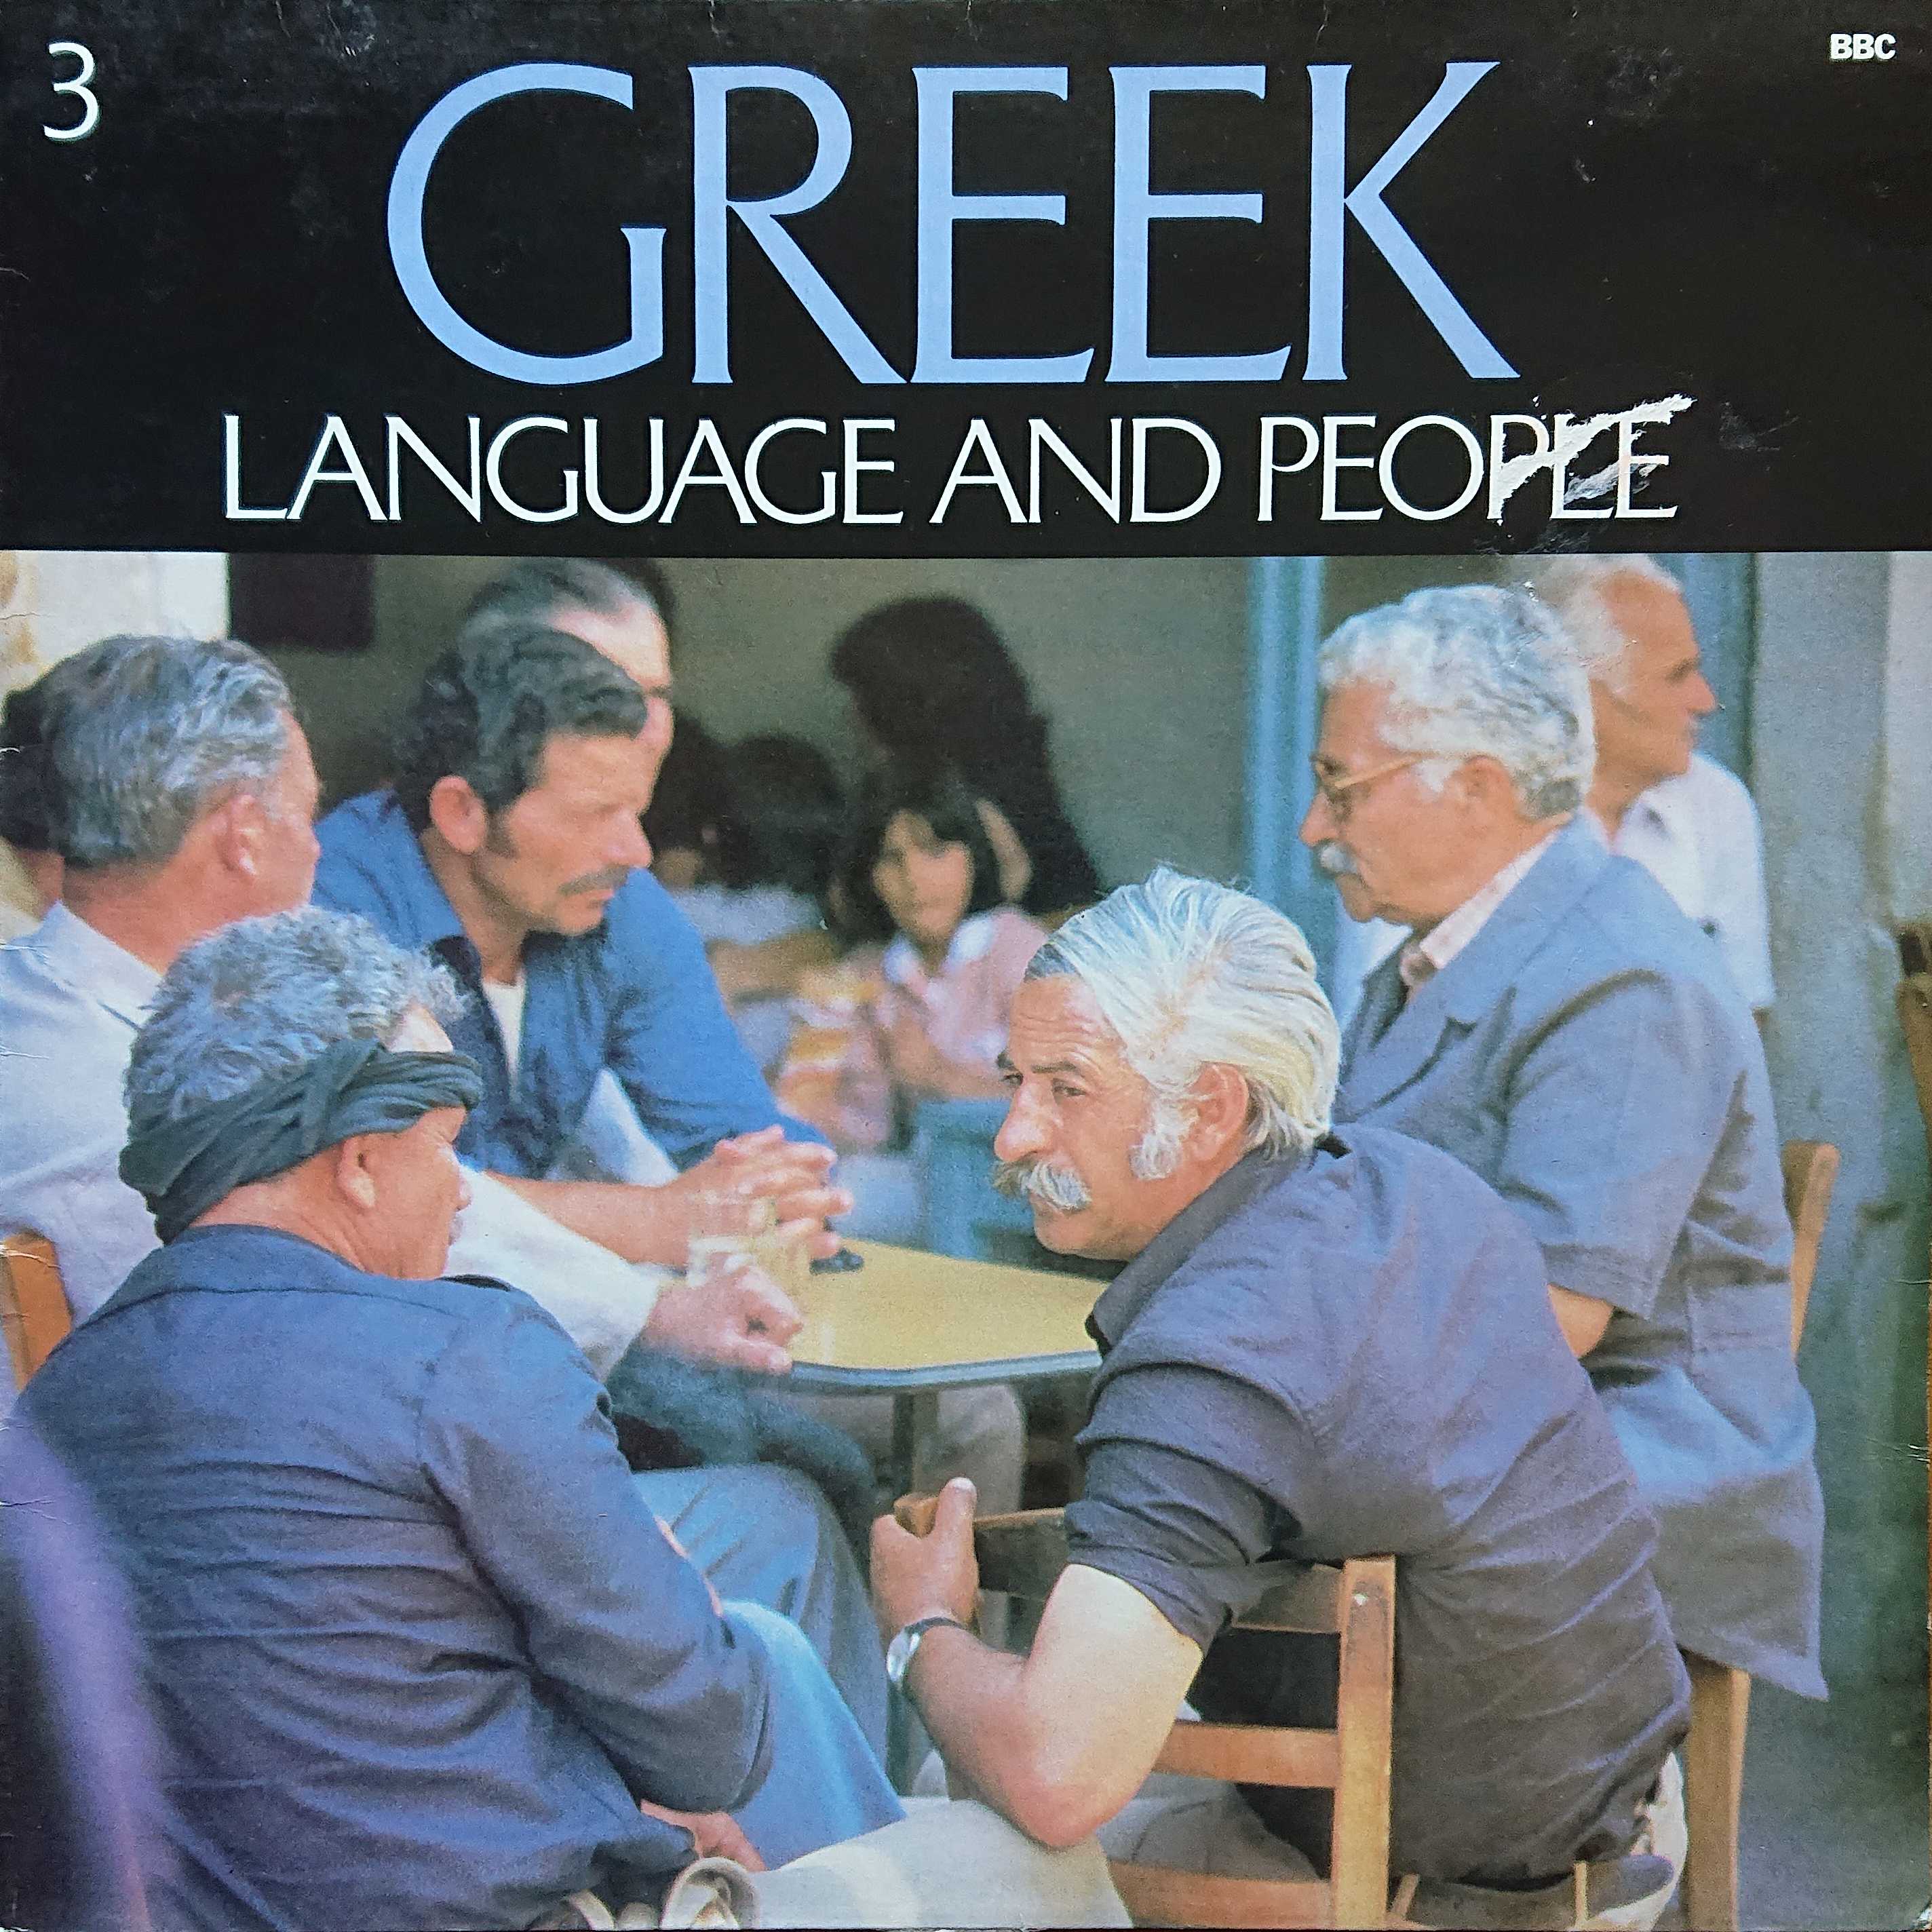 Picture of OP 271 Greek language and people by artist David A. Hardy from the BBC records and Tapes library